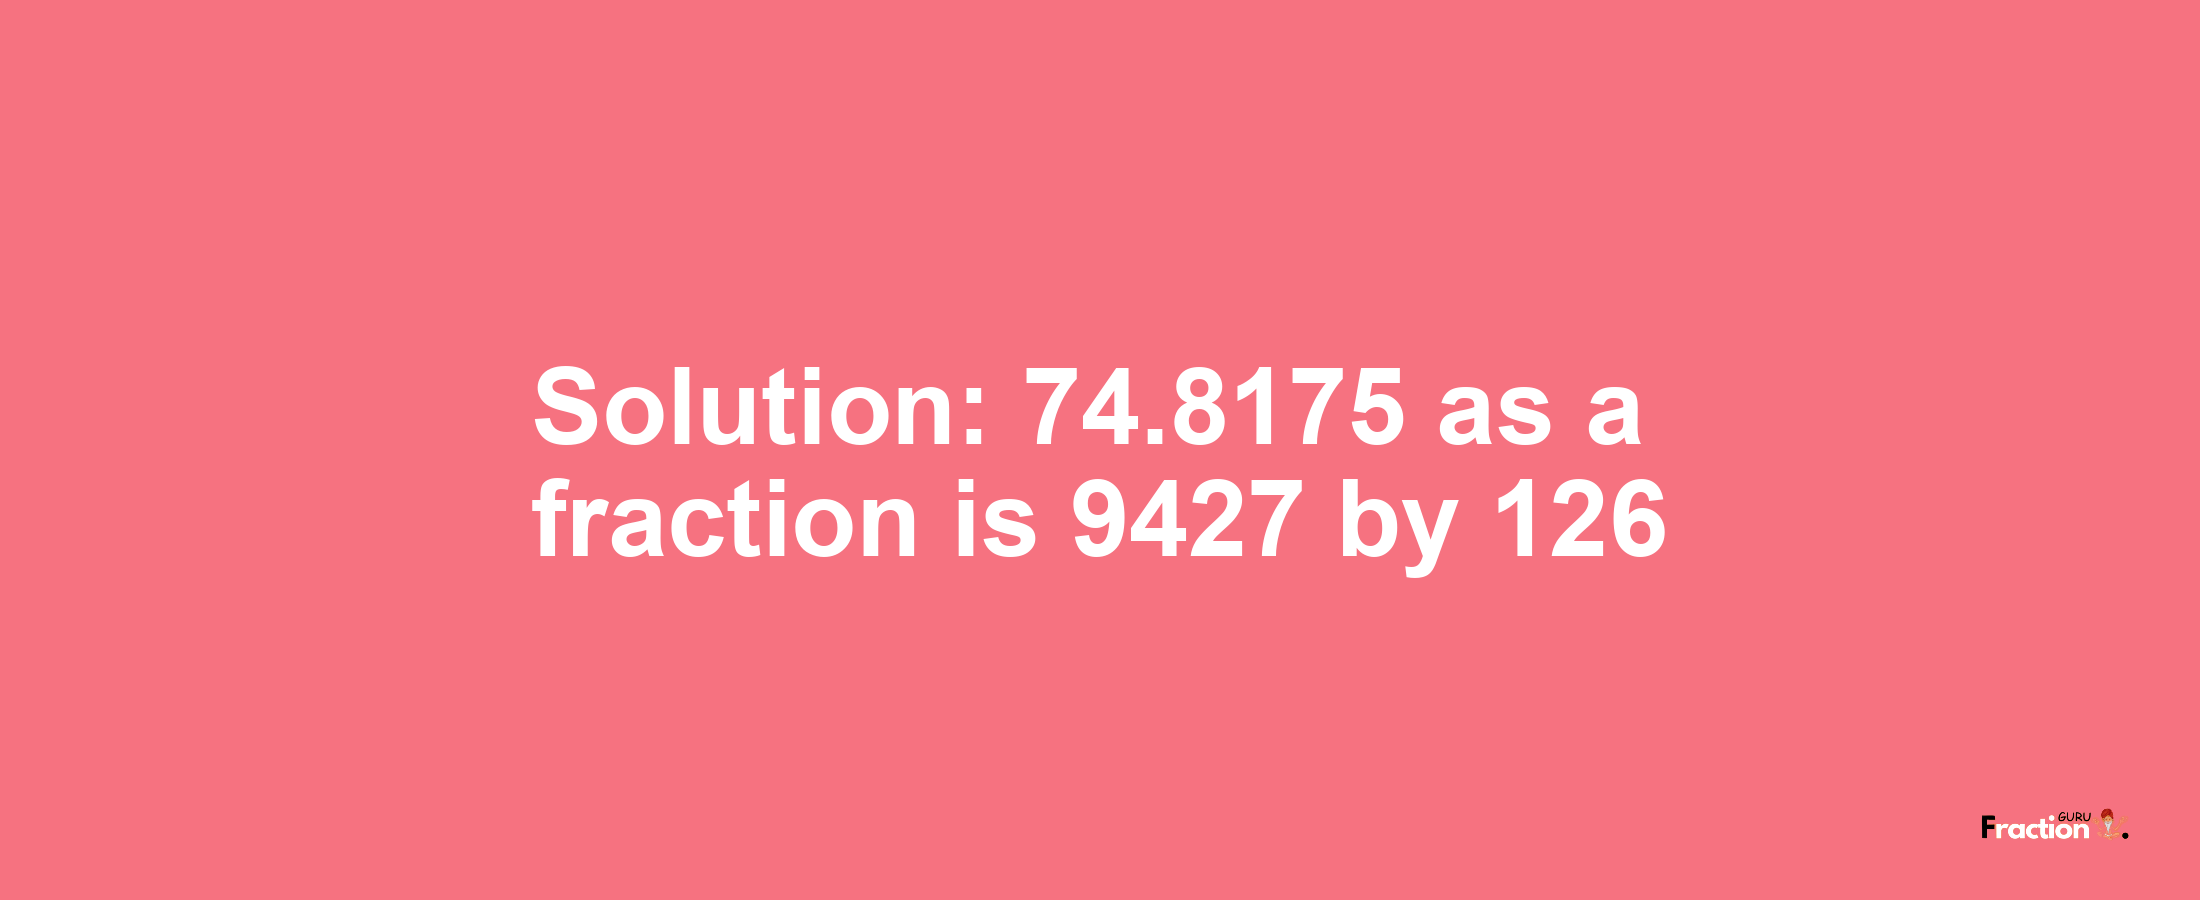 Solution:74.8175 as a fraction is 9427/126